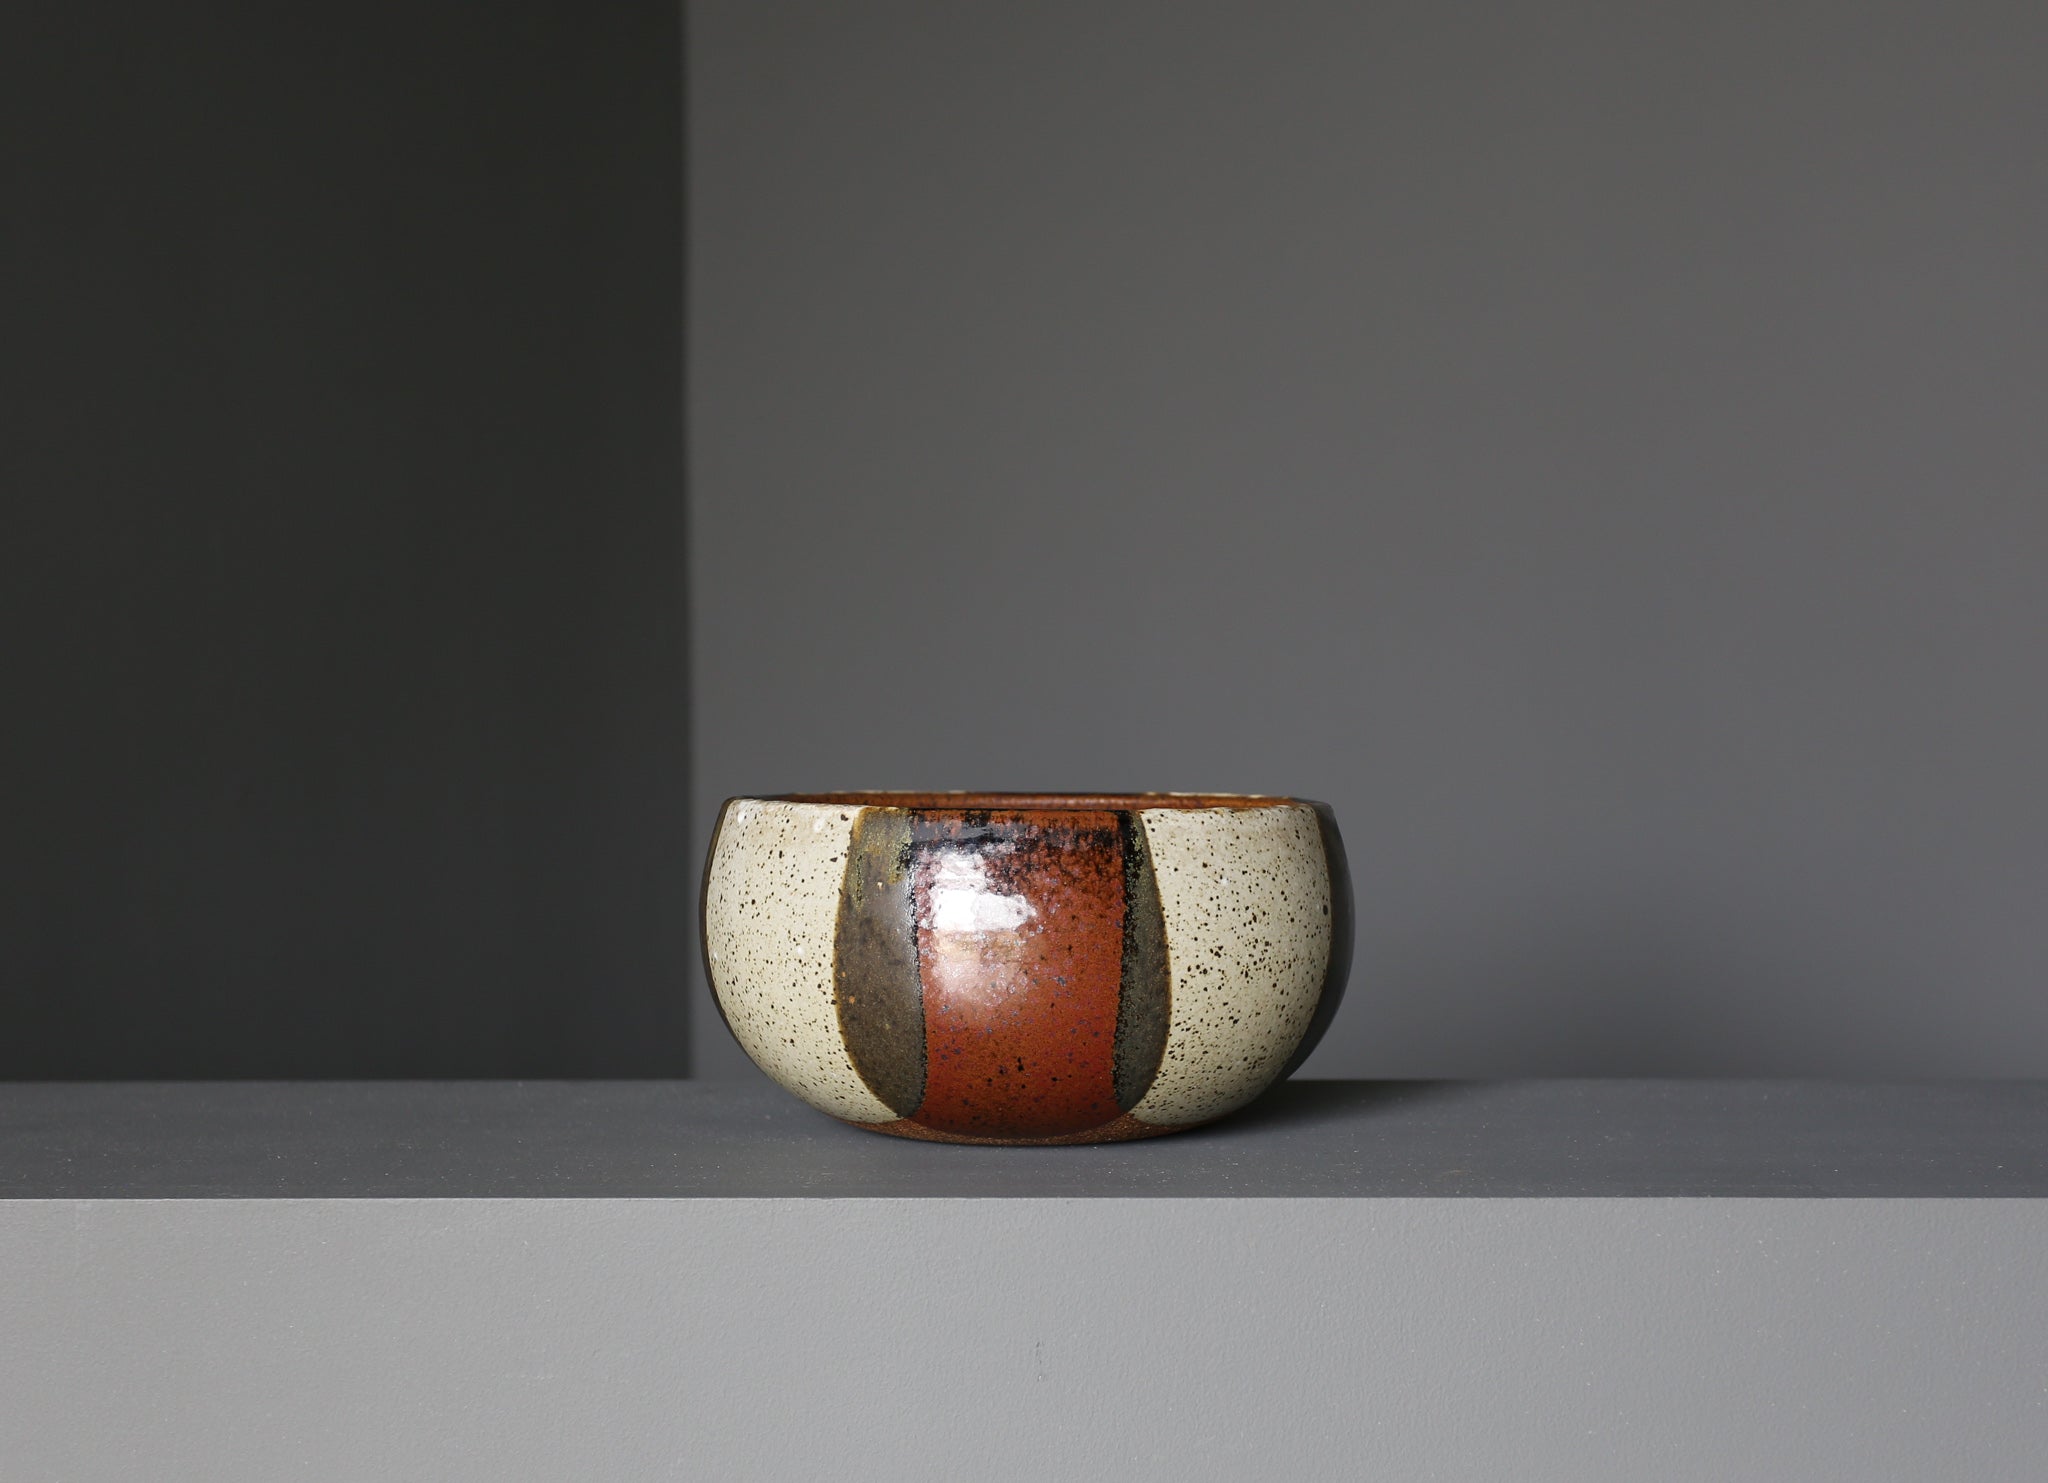 = SOLD = David Cressey "Flame Glaze" Planter for Architectural Pottery, circa 1970